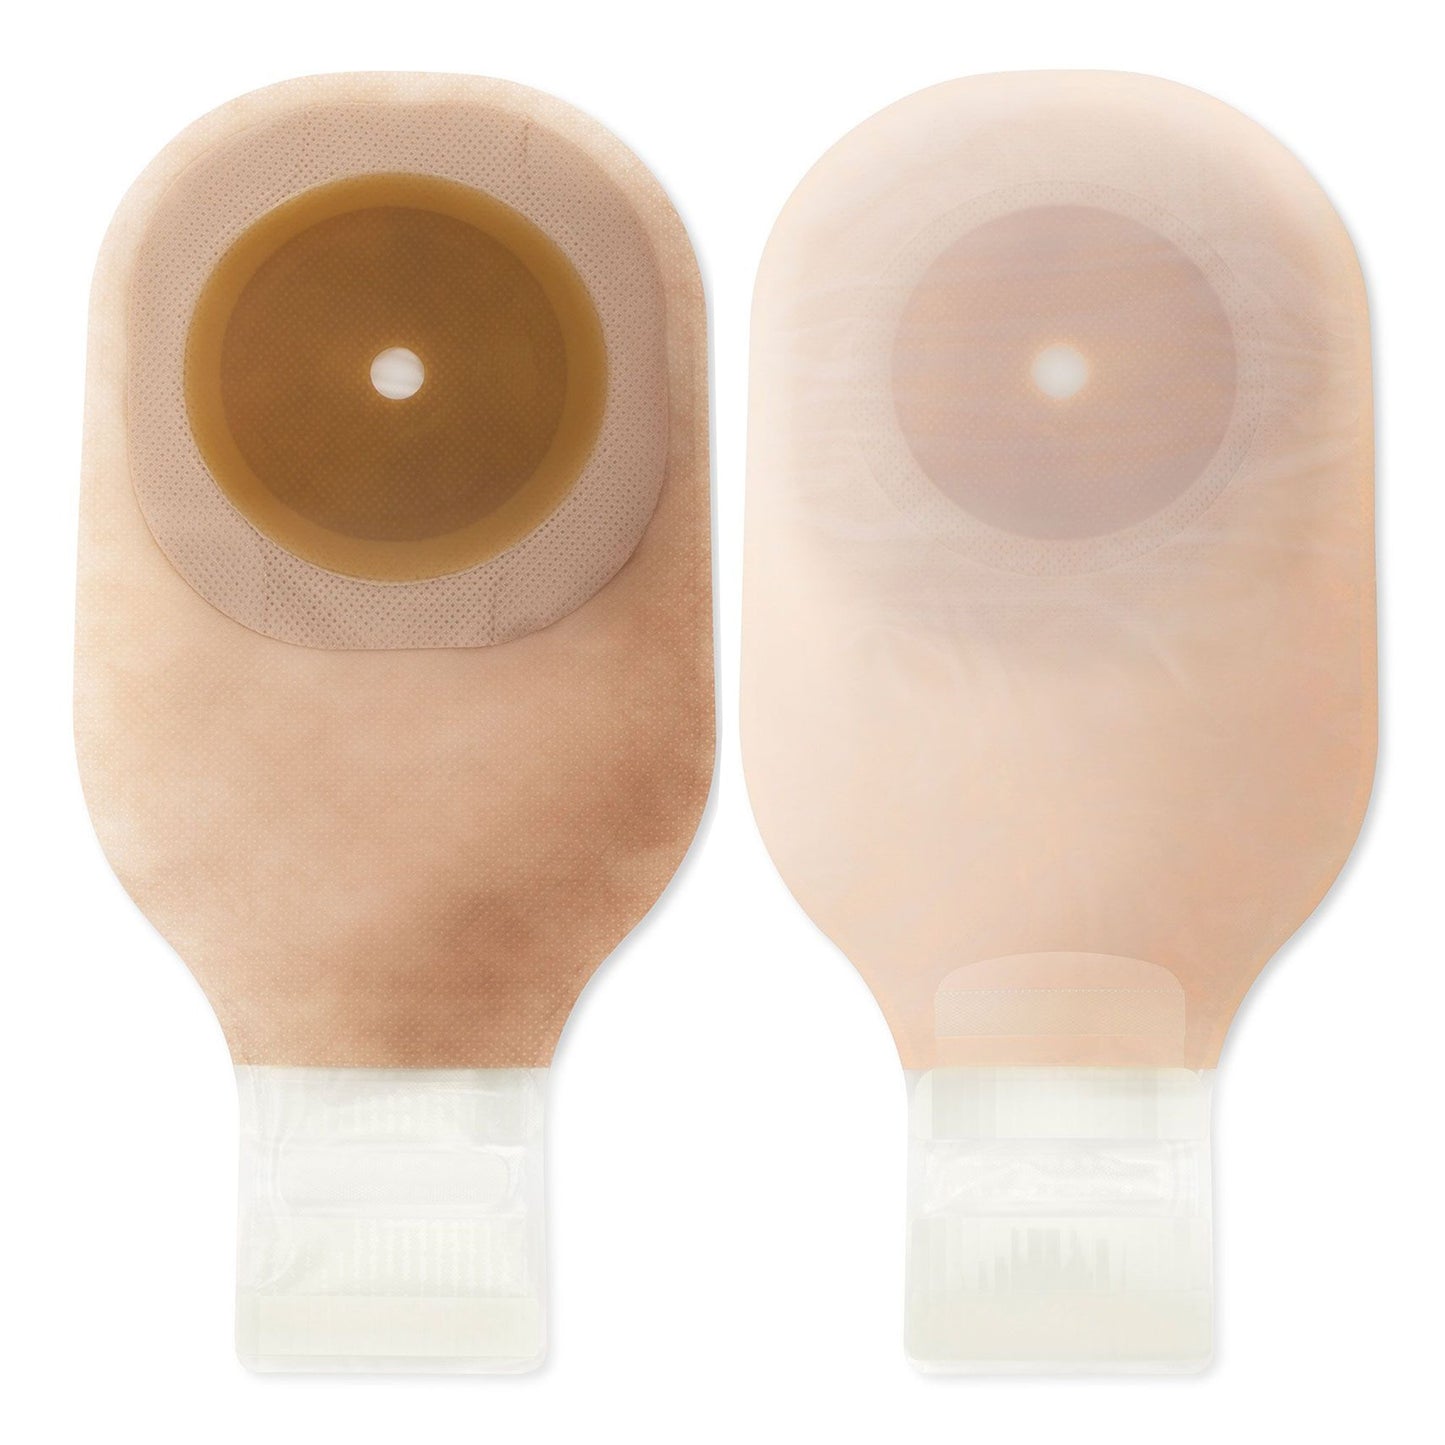 Premier™ One-Piece Drainable Transparent Colostomy Pouch, 12 Inch Length, 1.5 Inch Flange, 5 ct